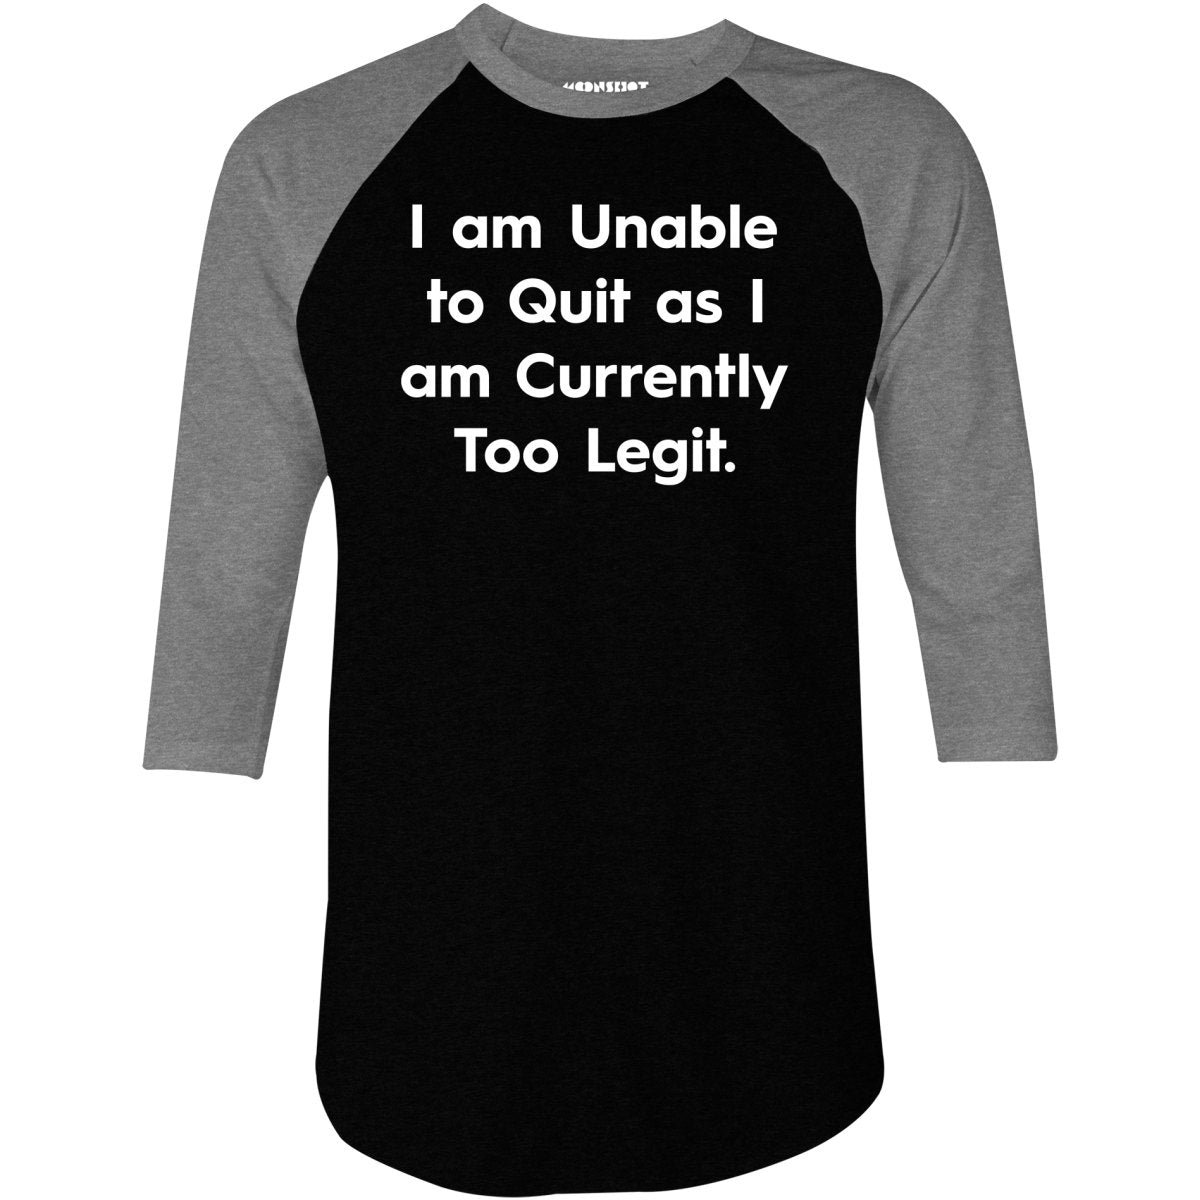 I am Unable to Quit as I am Currently Too Legit - 3/4 Sleeve Raglan T-Shirt